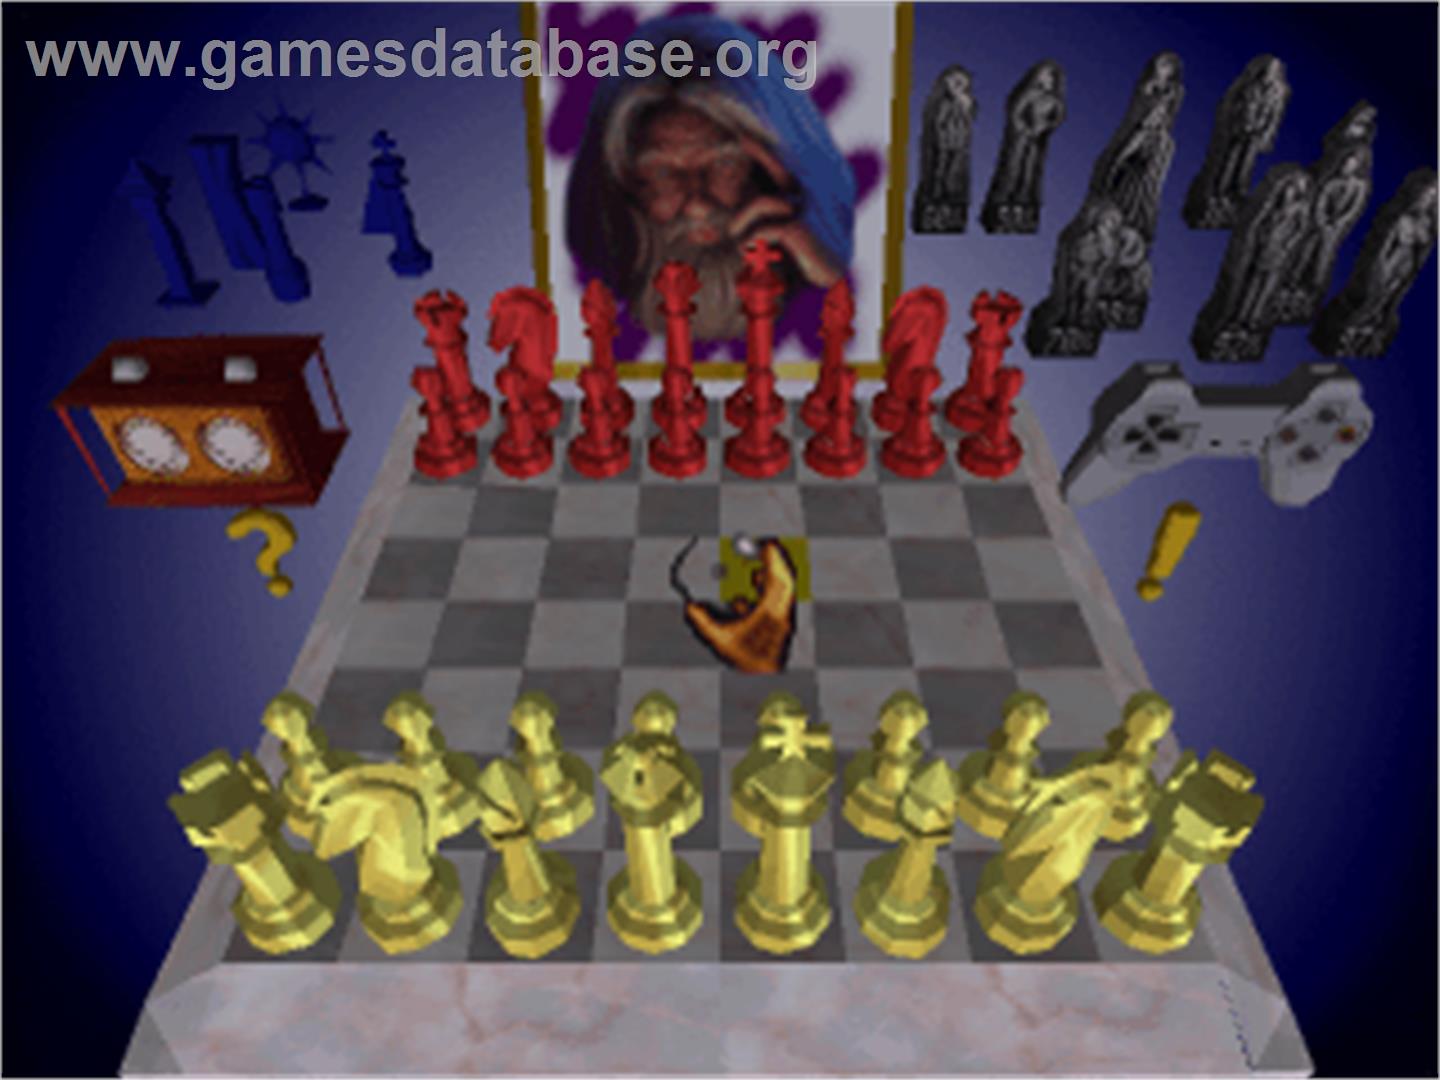 Chessmaster 3-D - Sony Playstation - Artwork - In Game